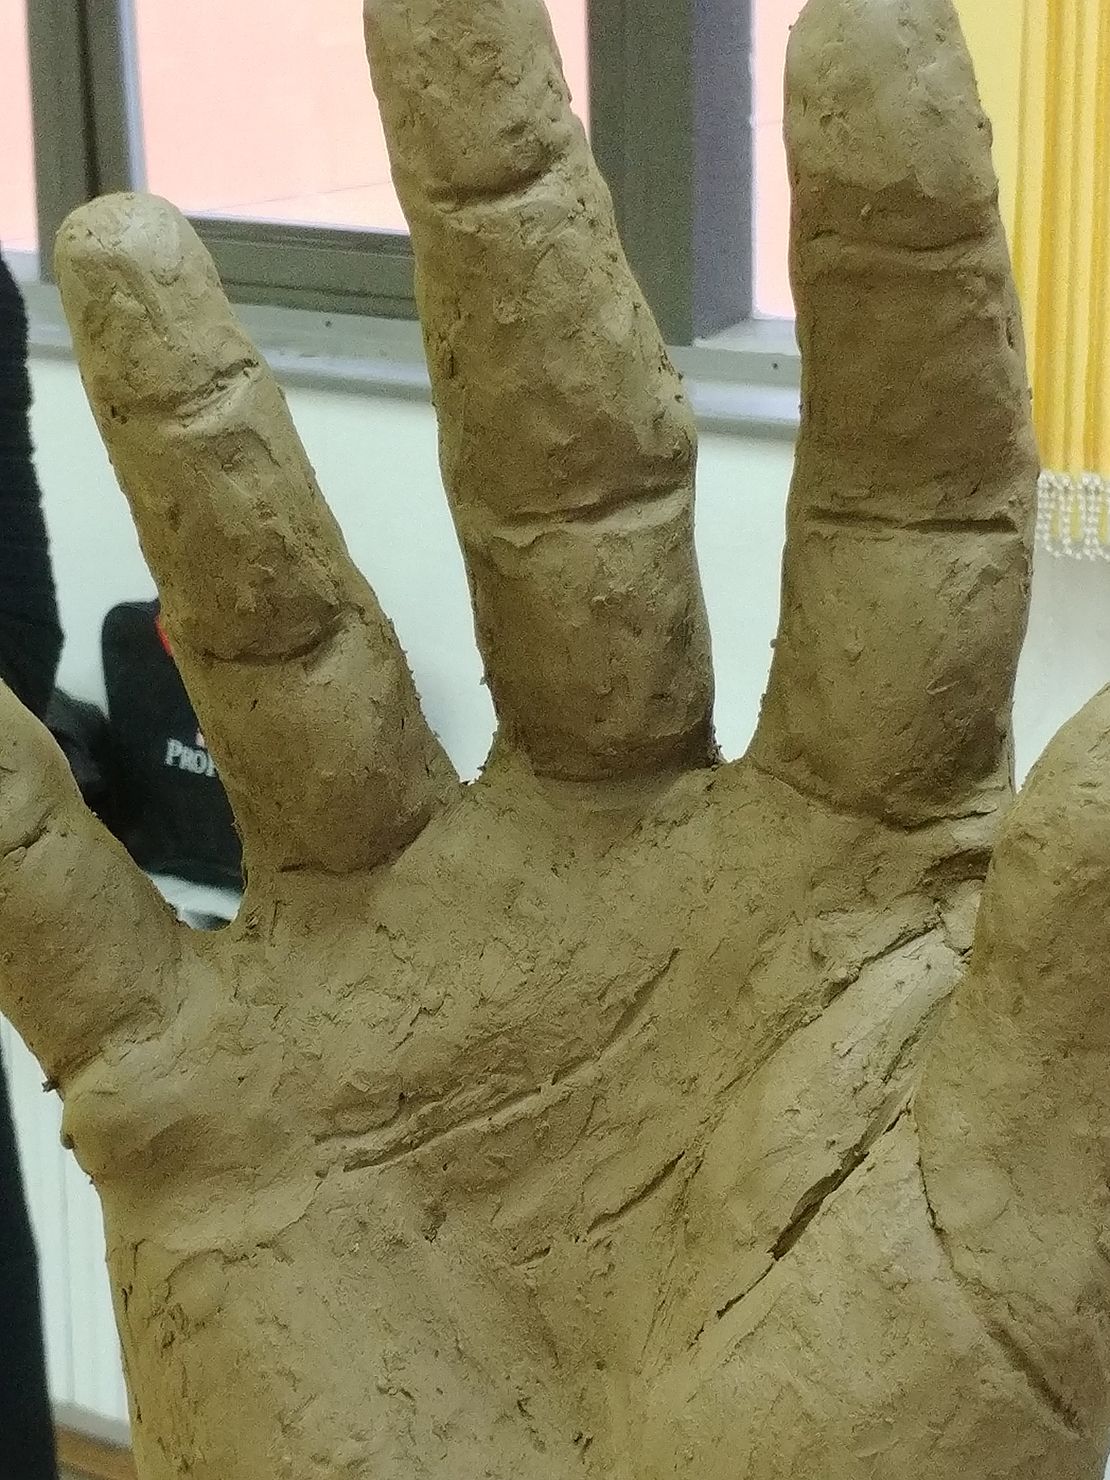 Modeling a hand in clay.